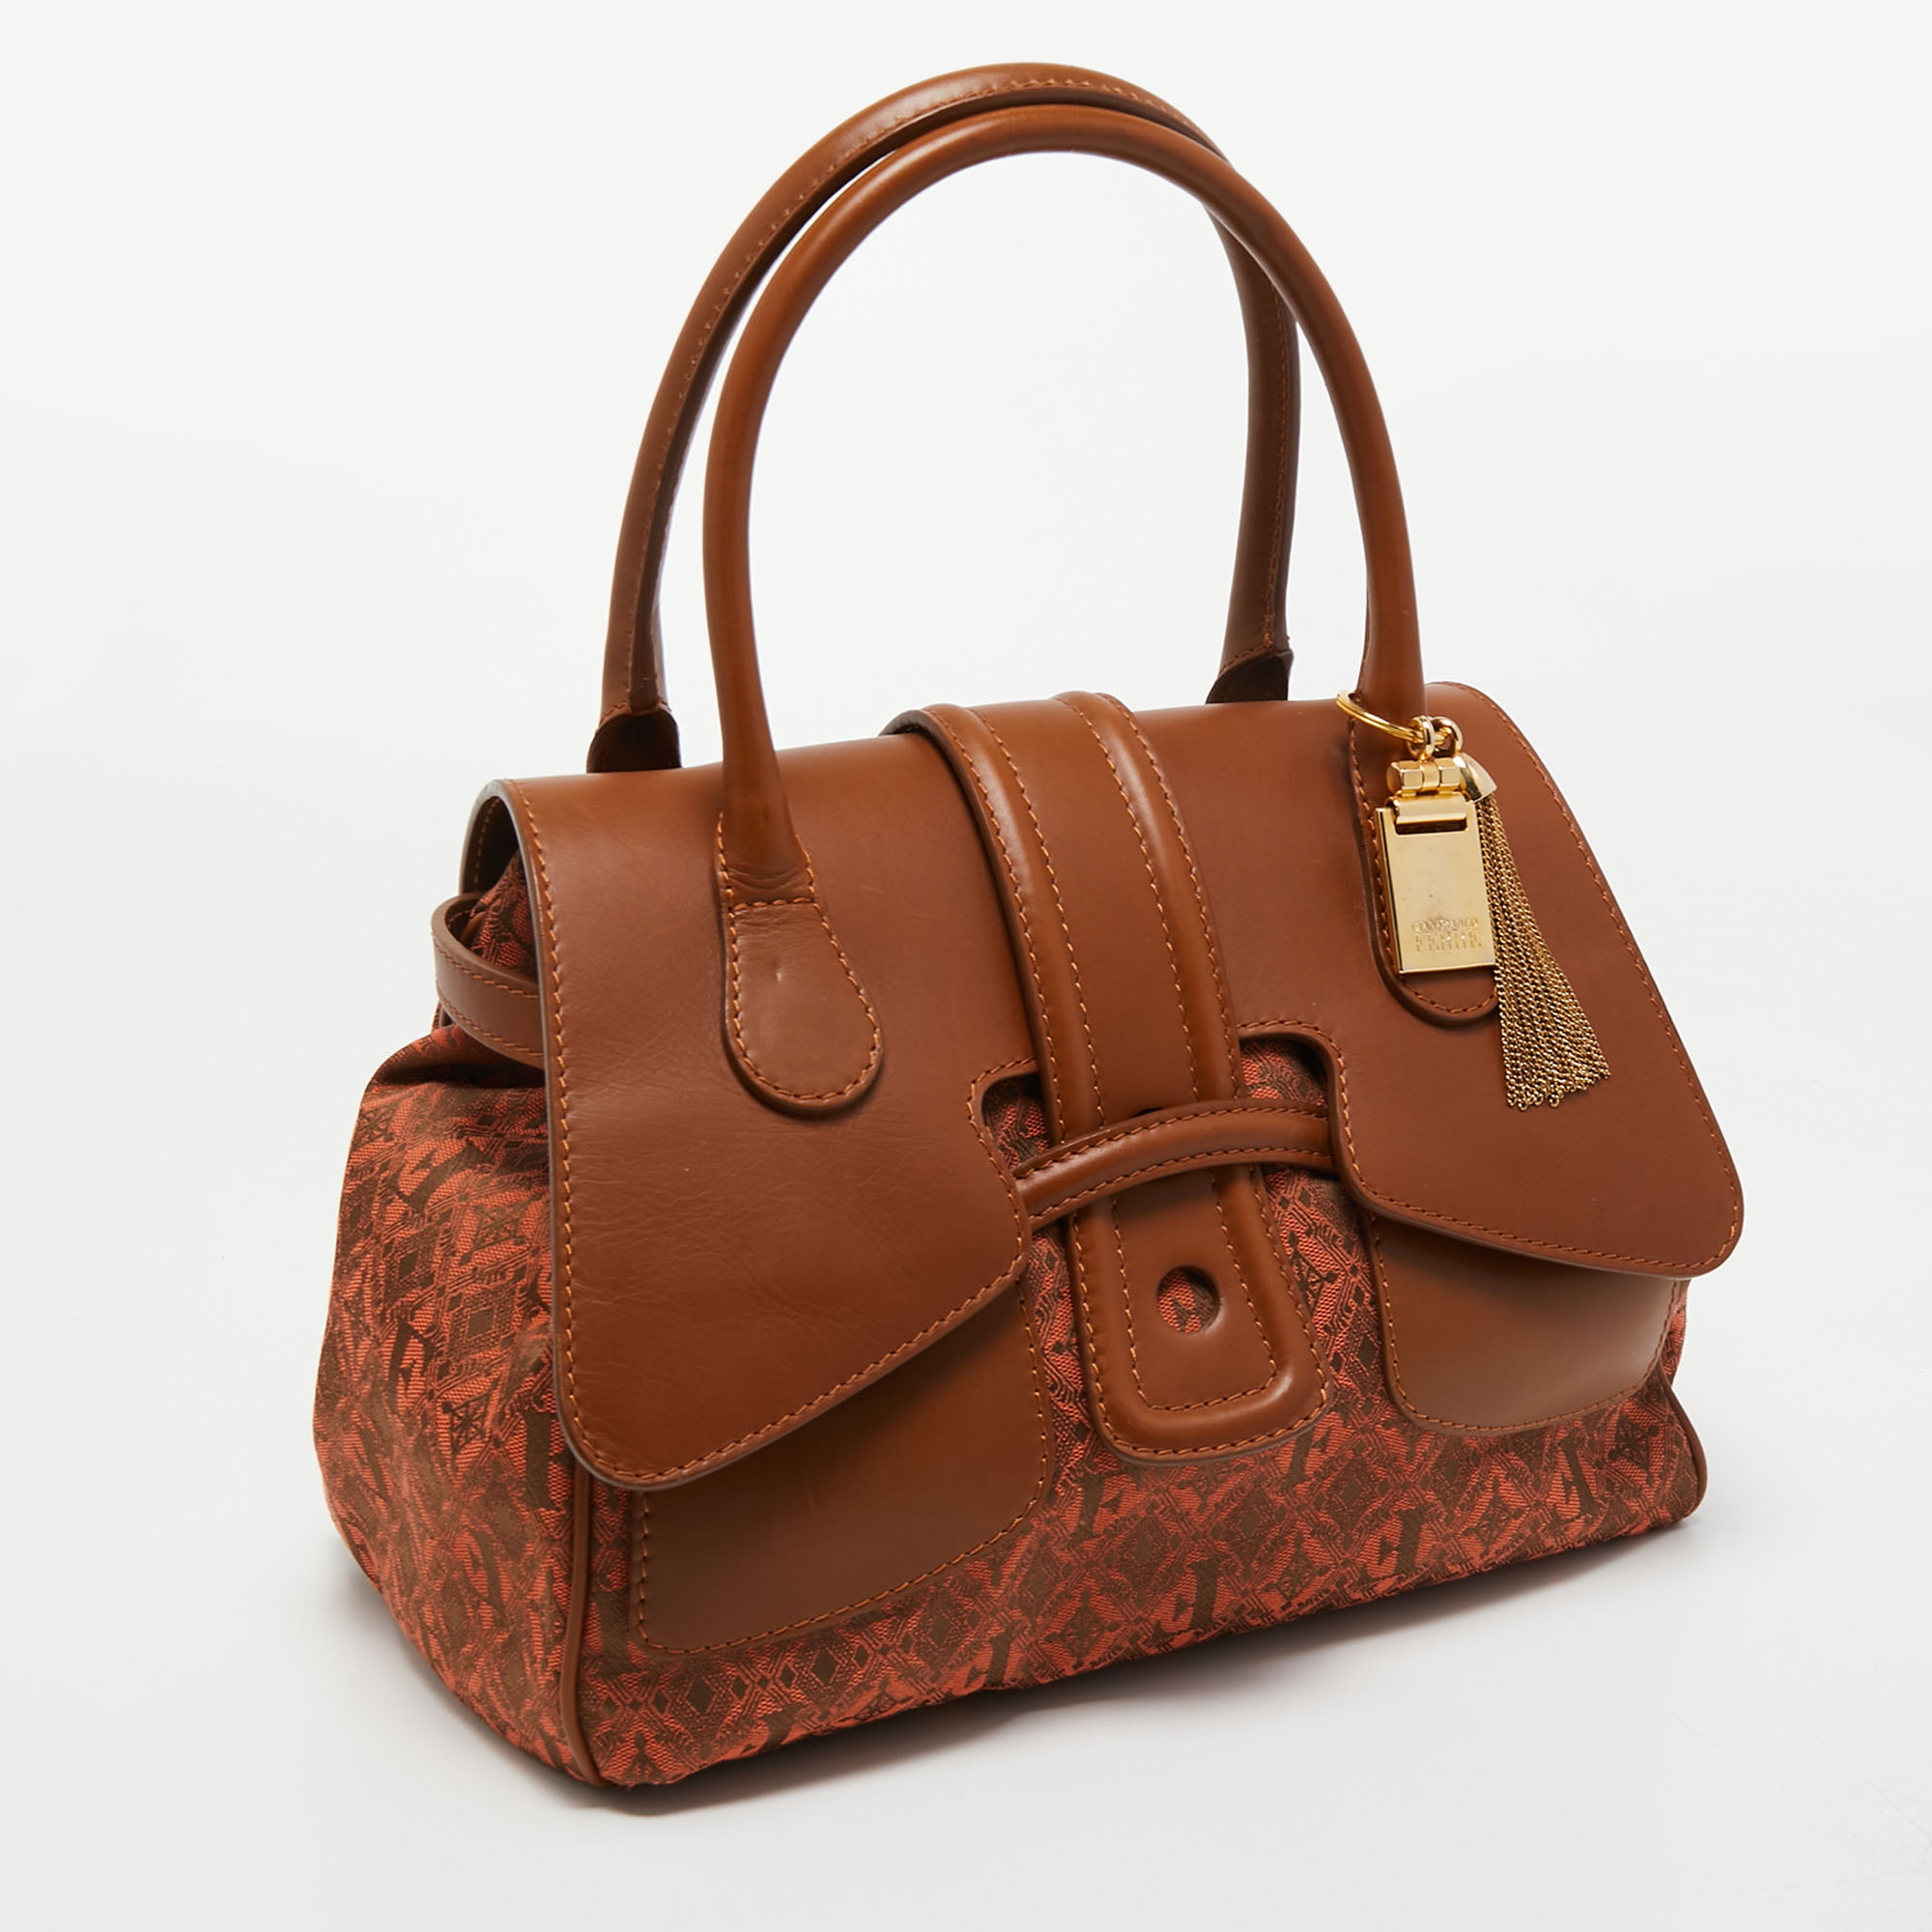 Gianfranco Ferre Brown Jacquard Fabric And Leather Flap Satchel